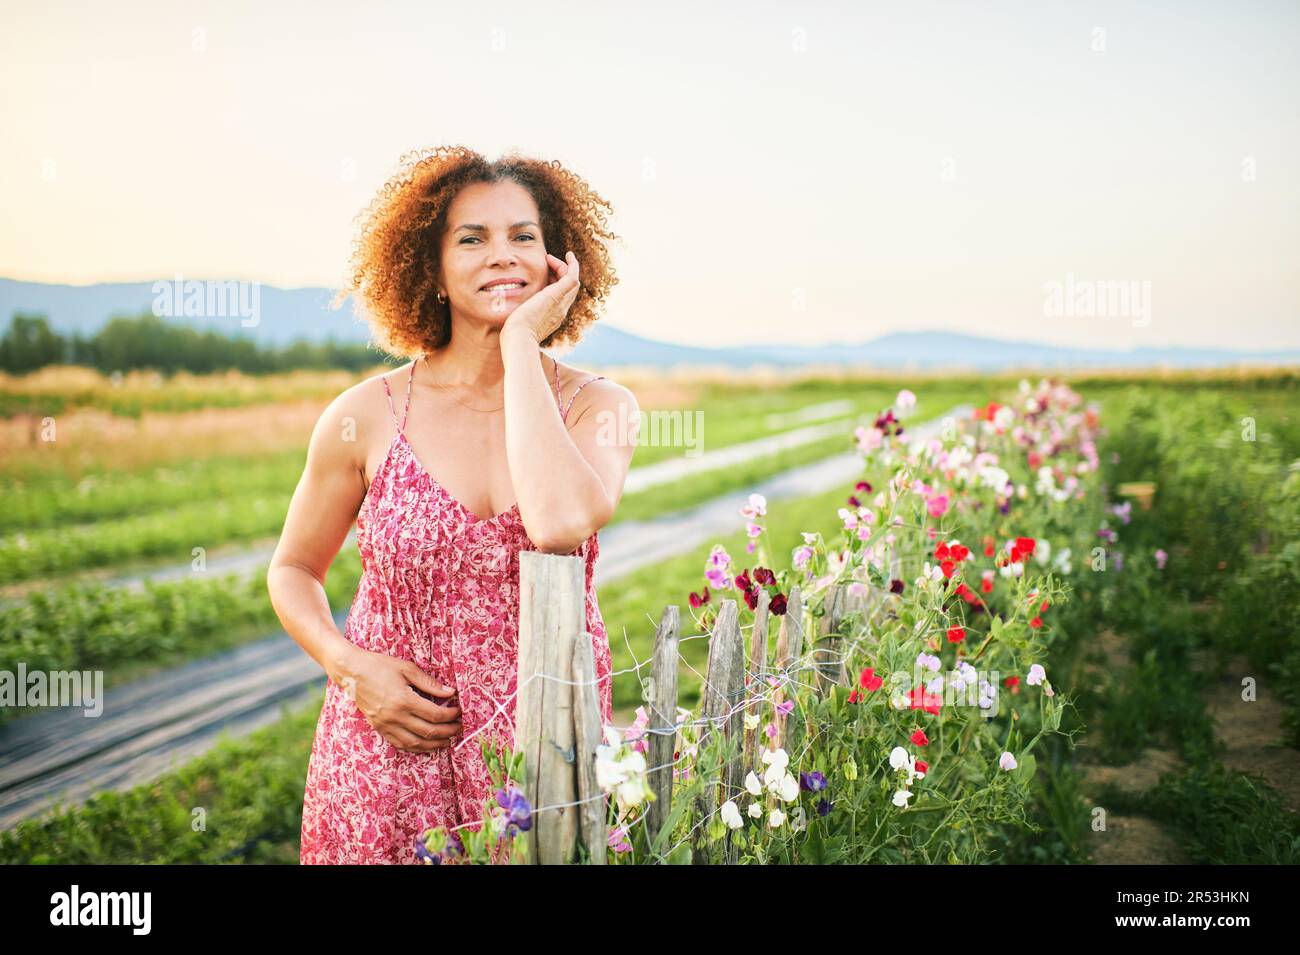 Outdoor portrait of beautiful middle age woman enjoying nice suuny evening in countryside, leaning on flower fence, wearing red dress Stock Photo